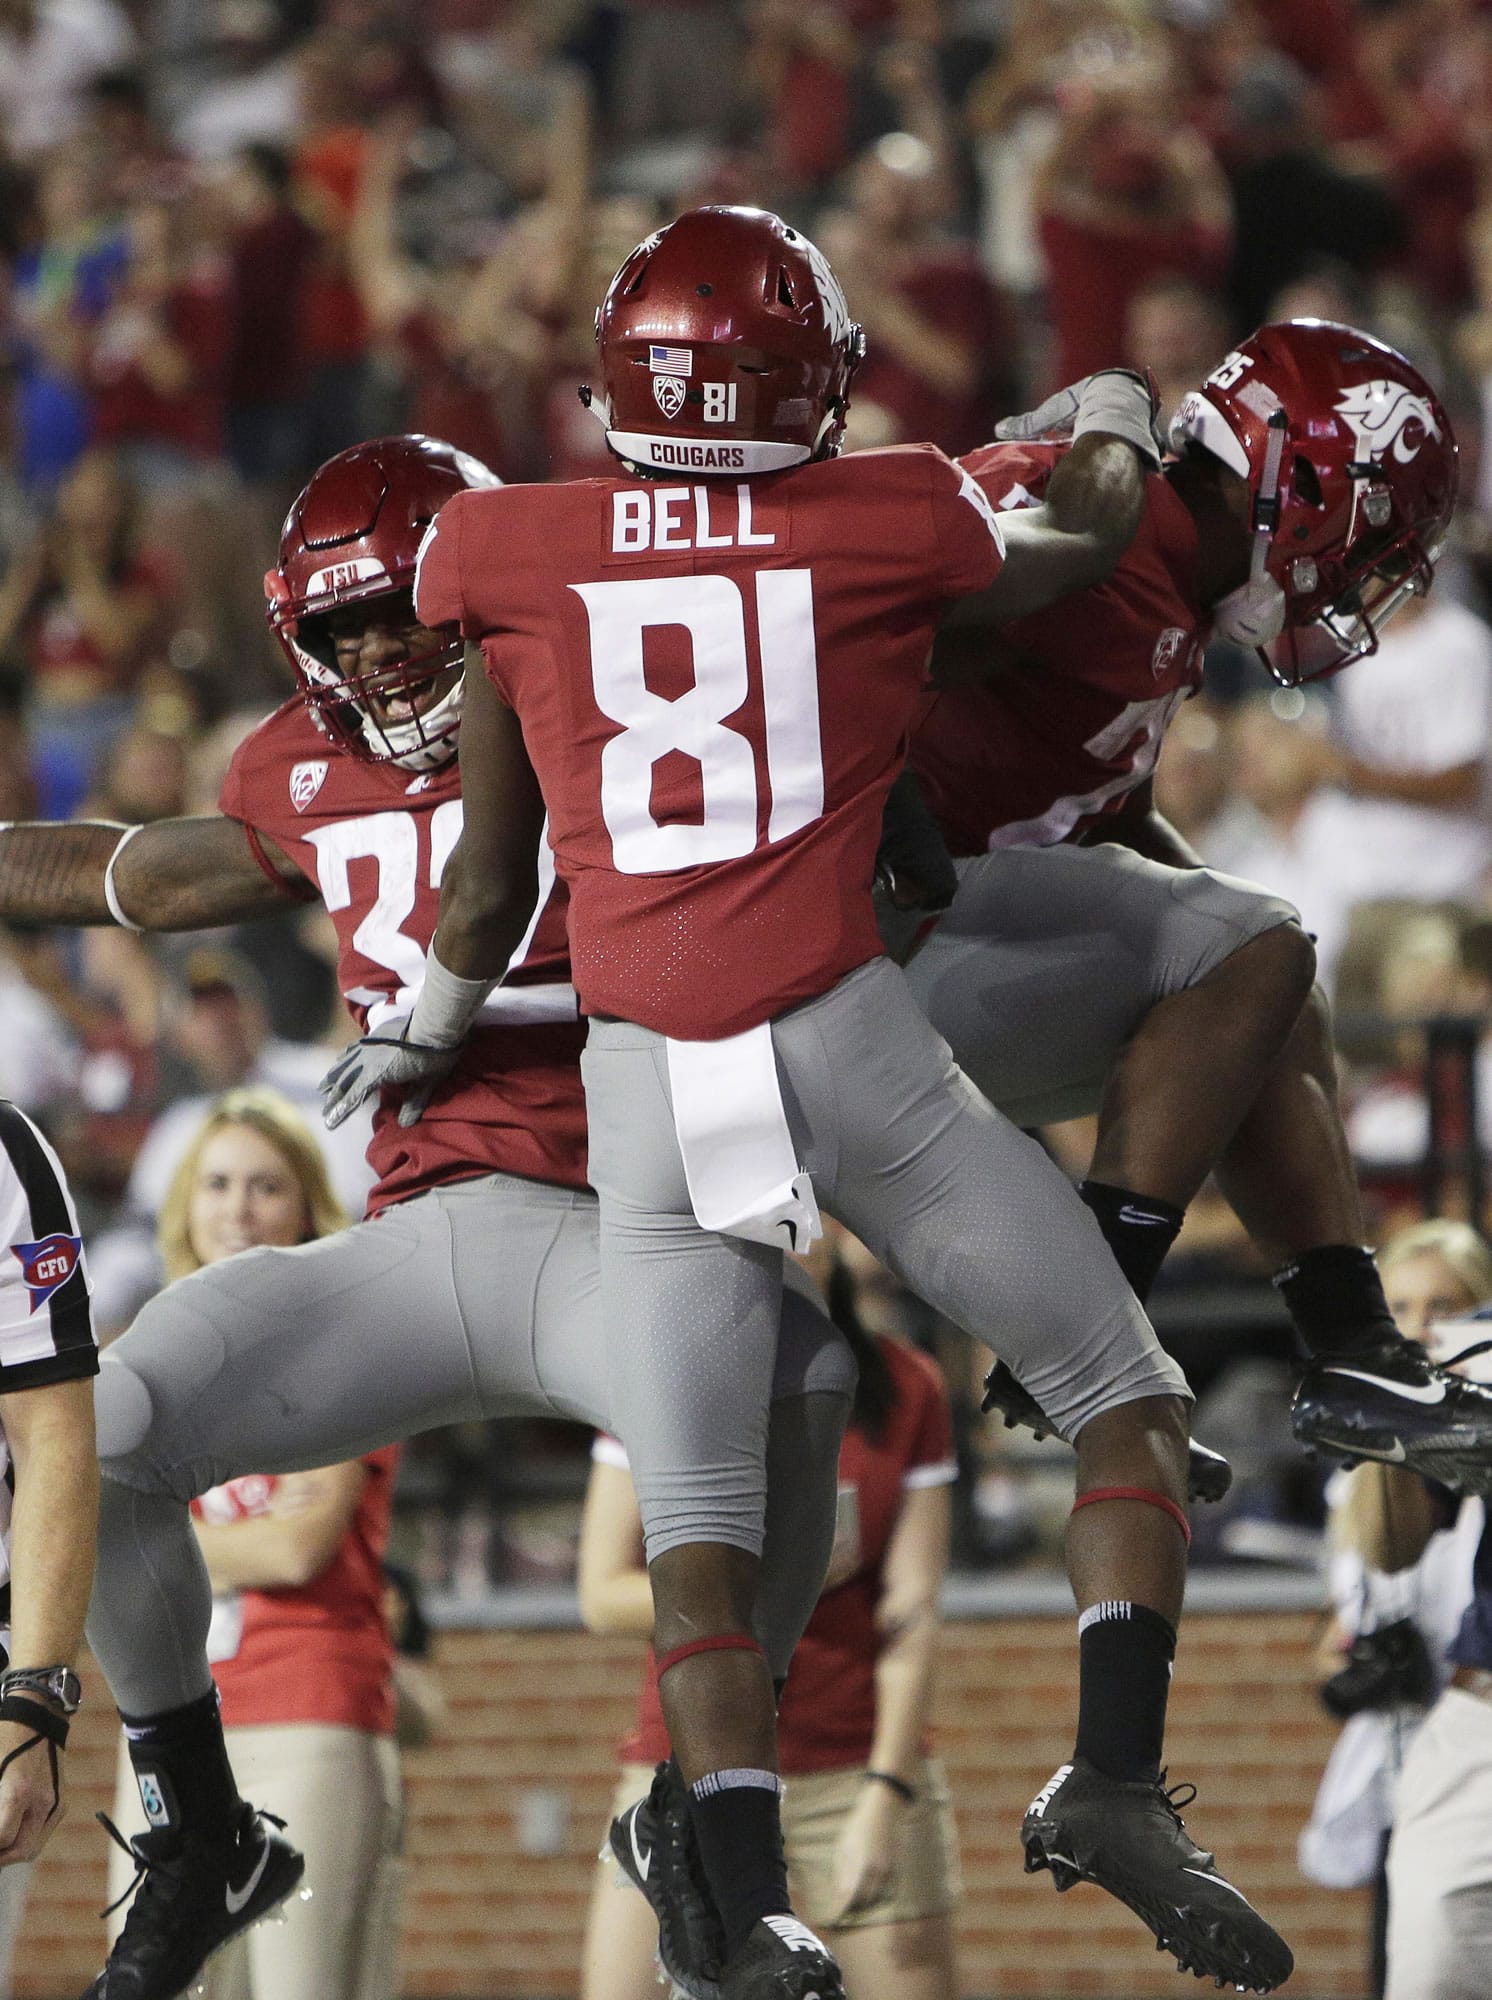 After scoring a touchdown, Washington State running back Jamal Morrow, right, celebrates with teammates wide receiver Renard Bell (81) and running back James Williams (32) during the second half of an NCAA college football game against Montana State in Pullman, Wash., Saturday, Sept. 2, 2017. Washington State won 31-0.